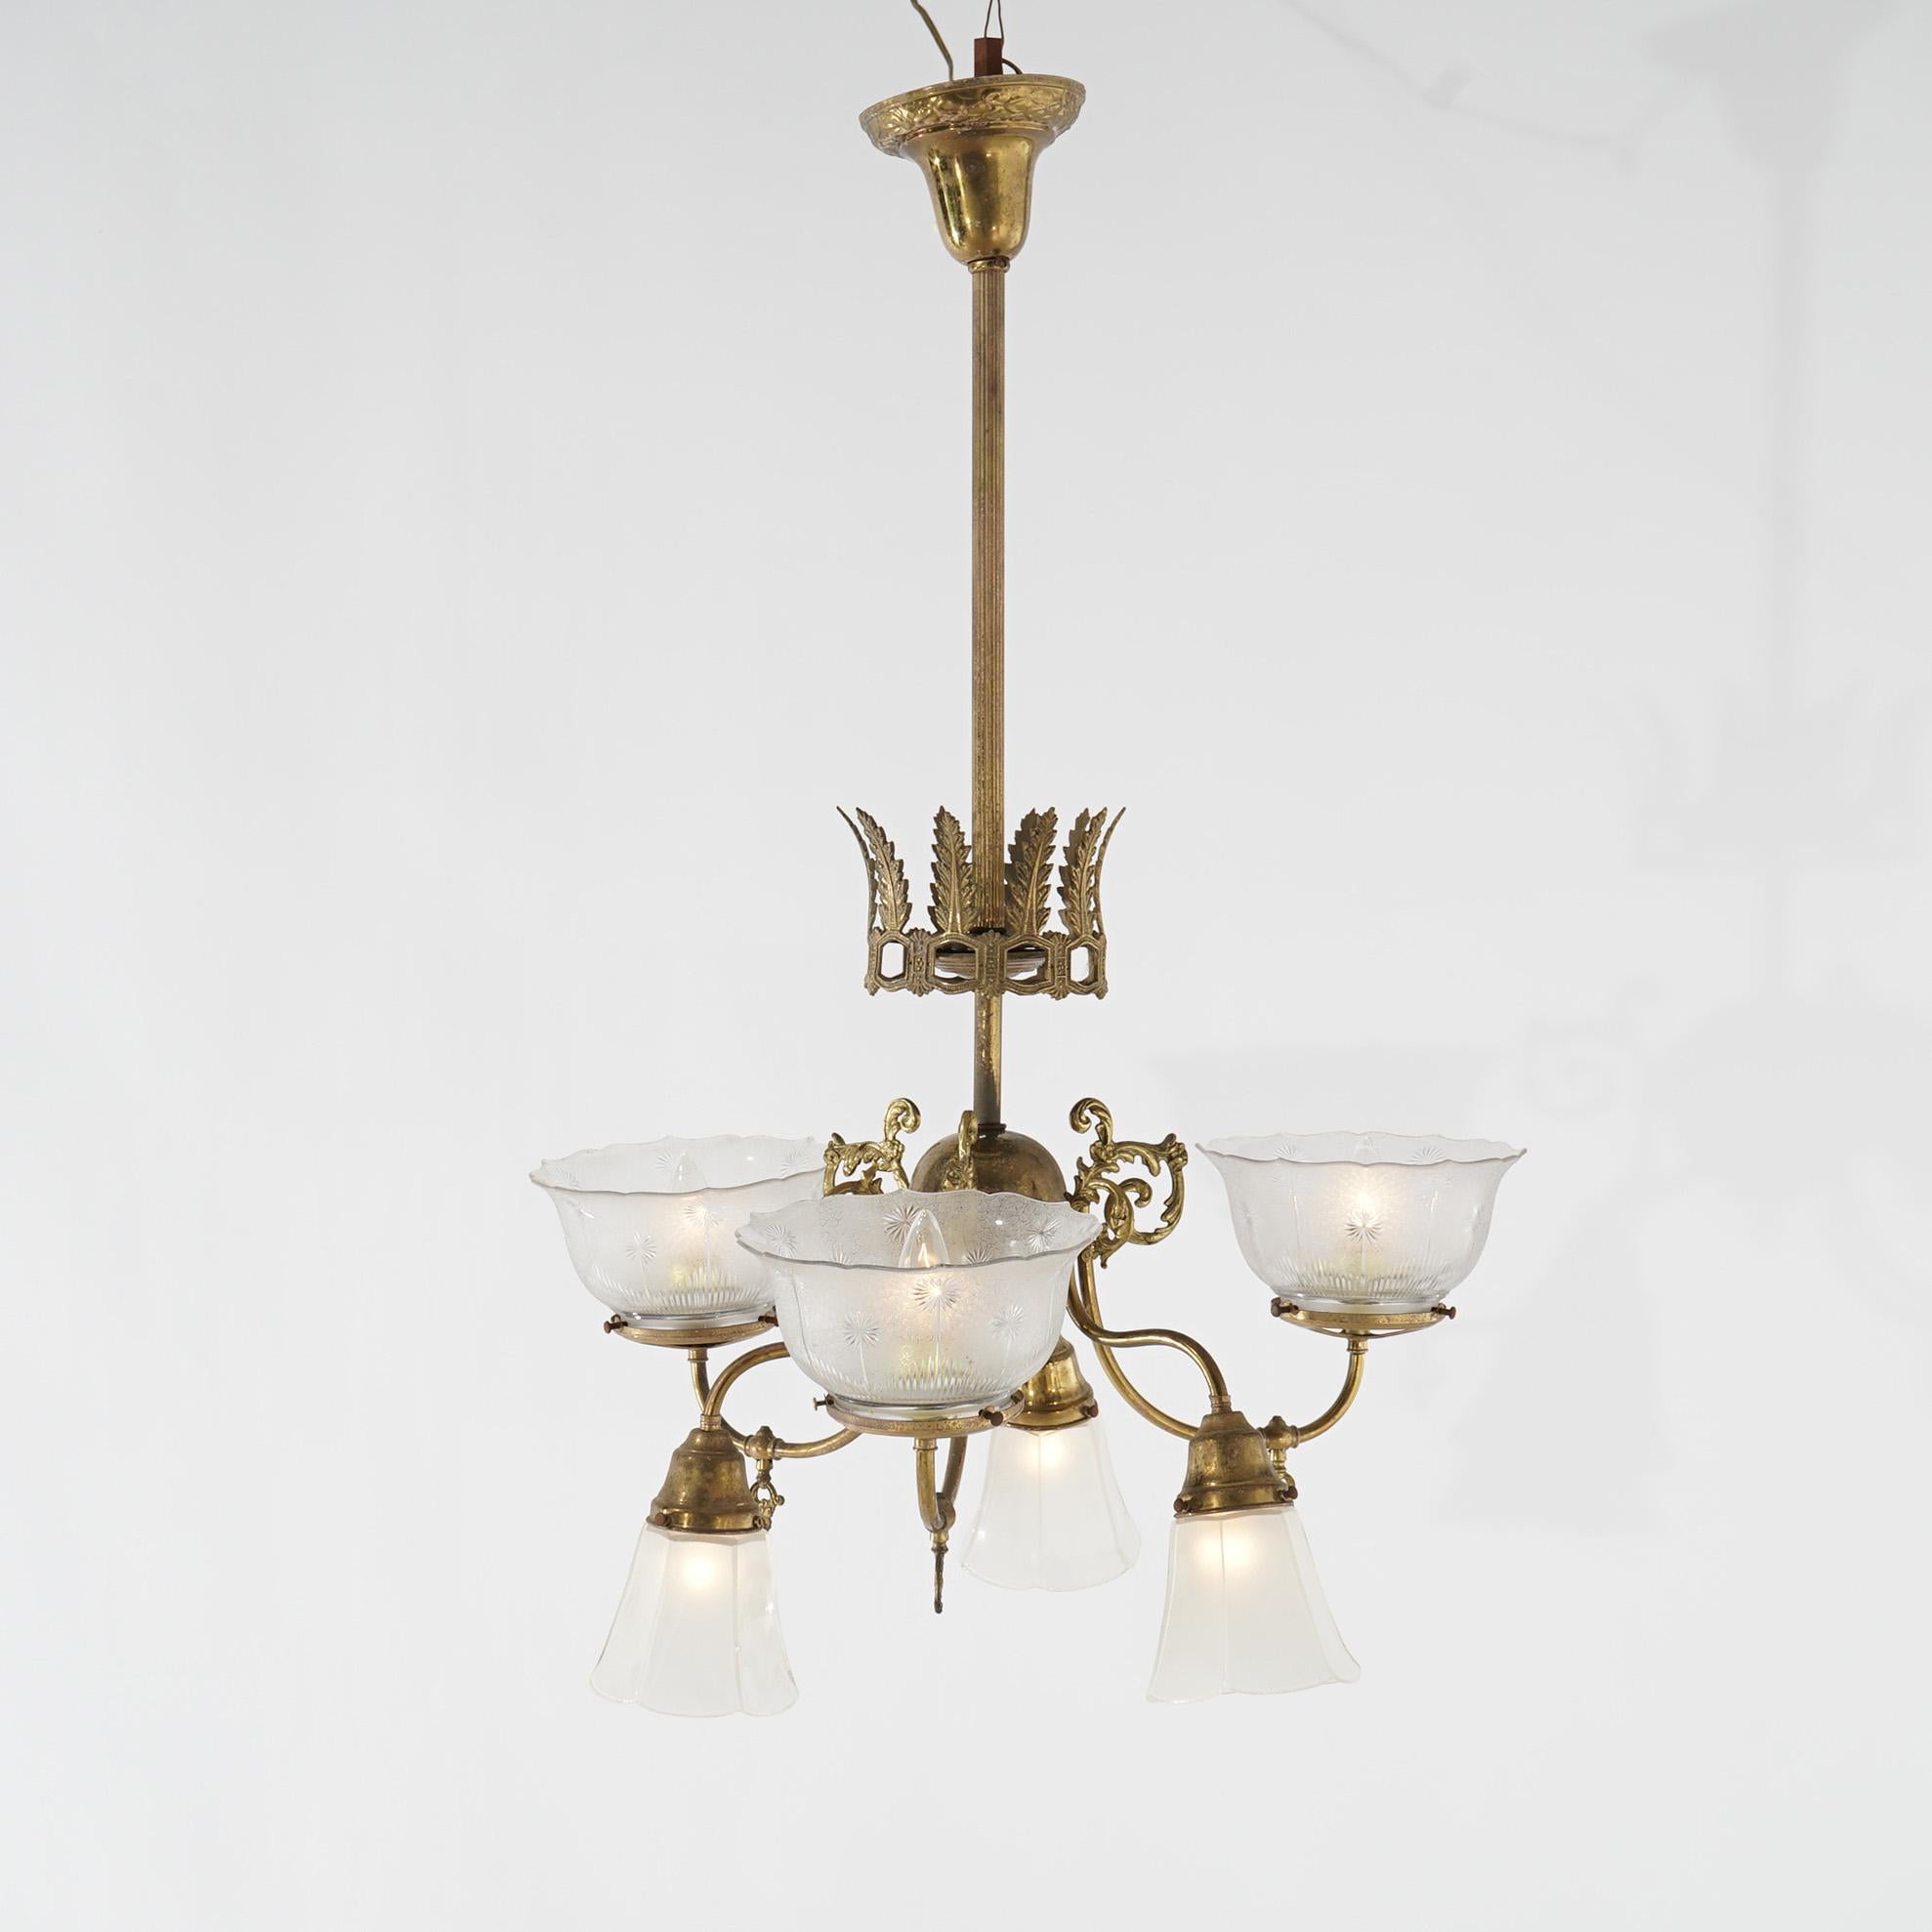 An antique Victorian gas and electric chandelier offers brass frame with scroll form up and down arms terminating in lights having glass shades, electrified, c1910

Measures - 36